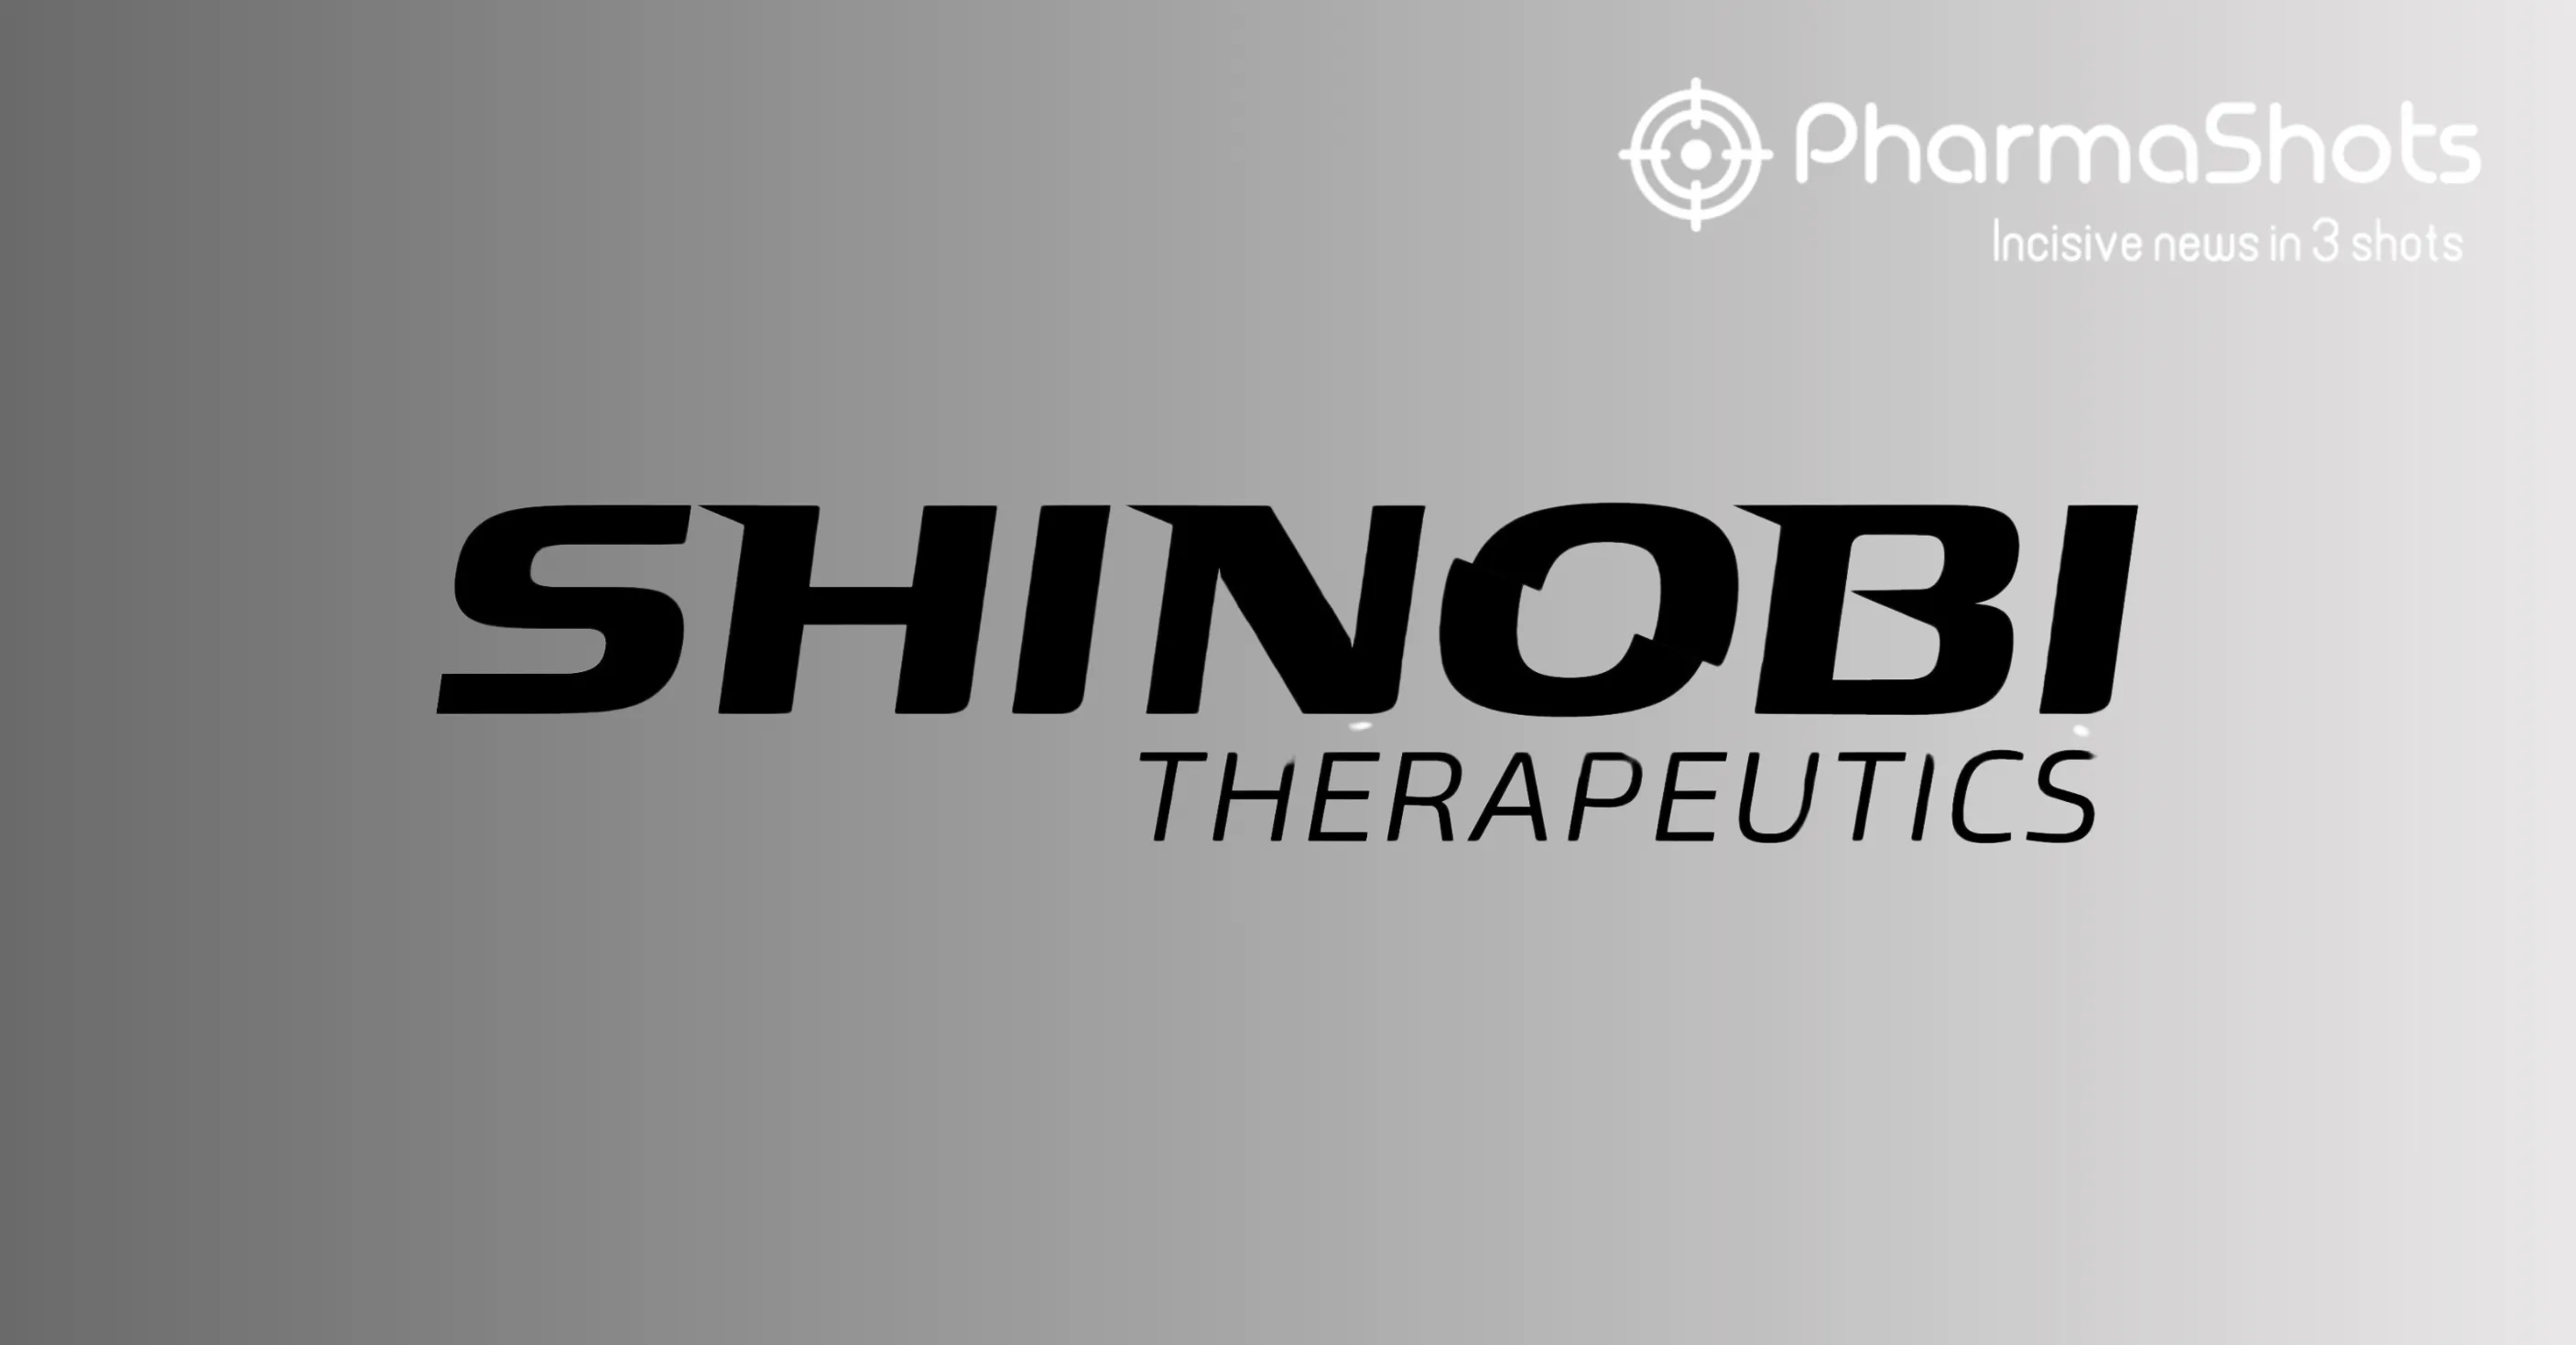 Shinobi Therapeutics Teams Up with Panasonic to Develop Affordable and Efficient iPS Cell Therapy Manufacturing Technology